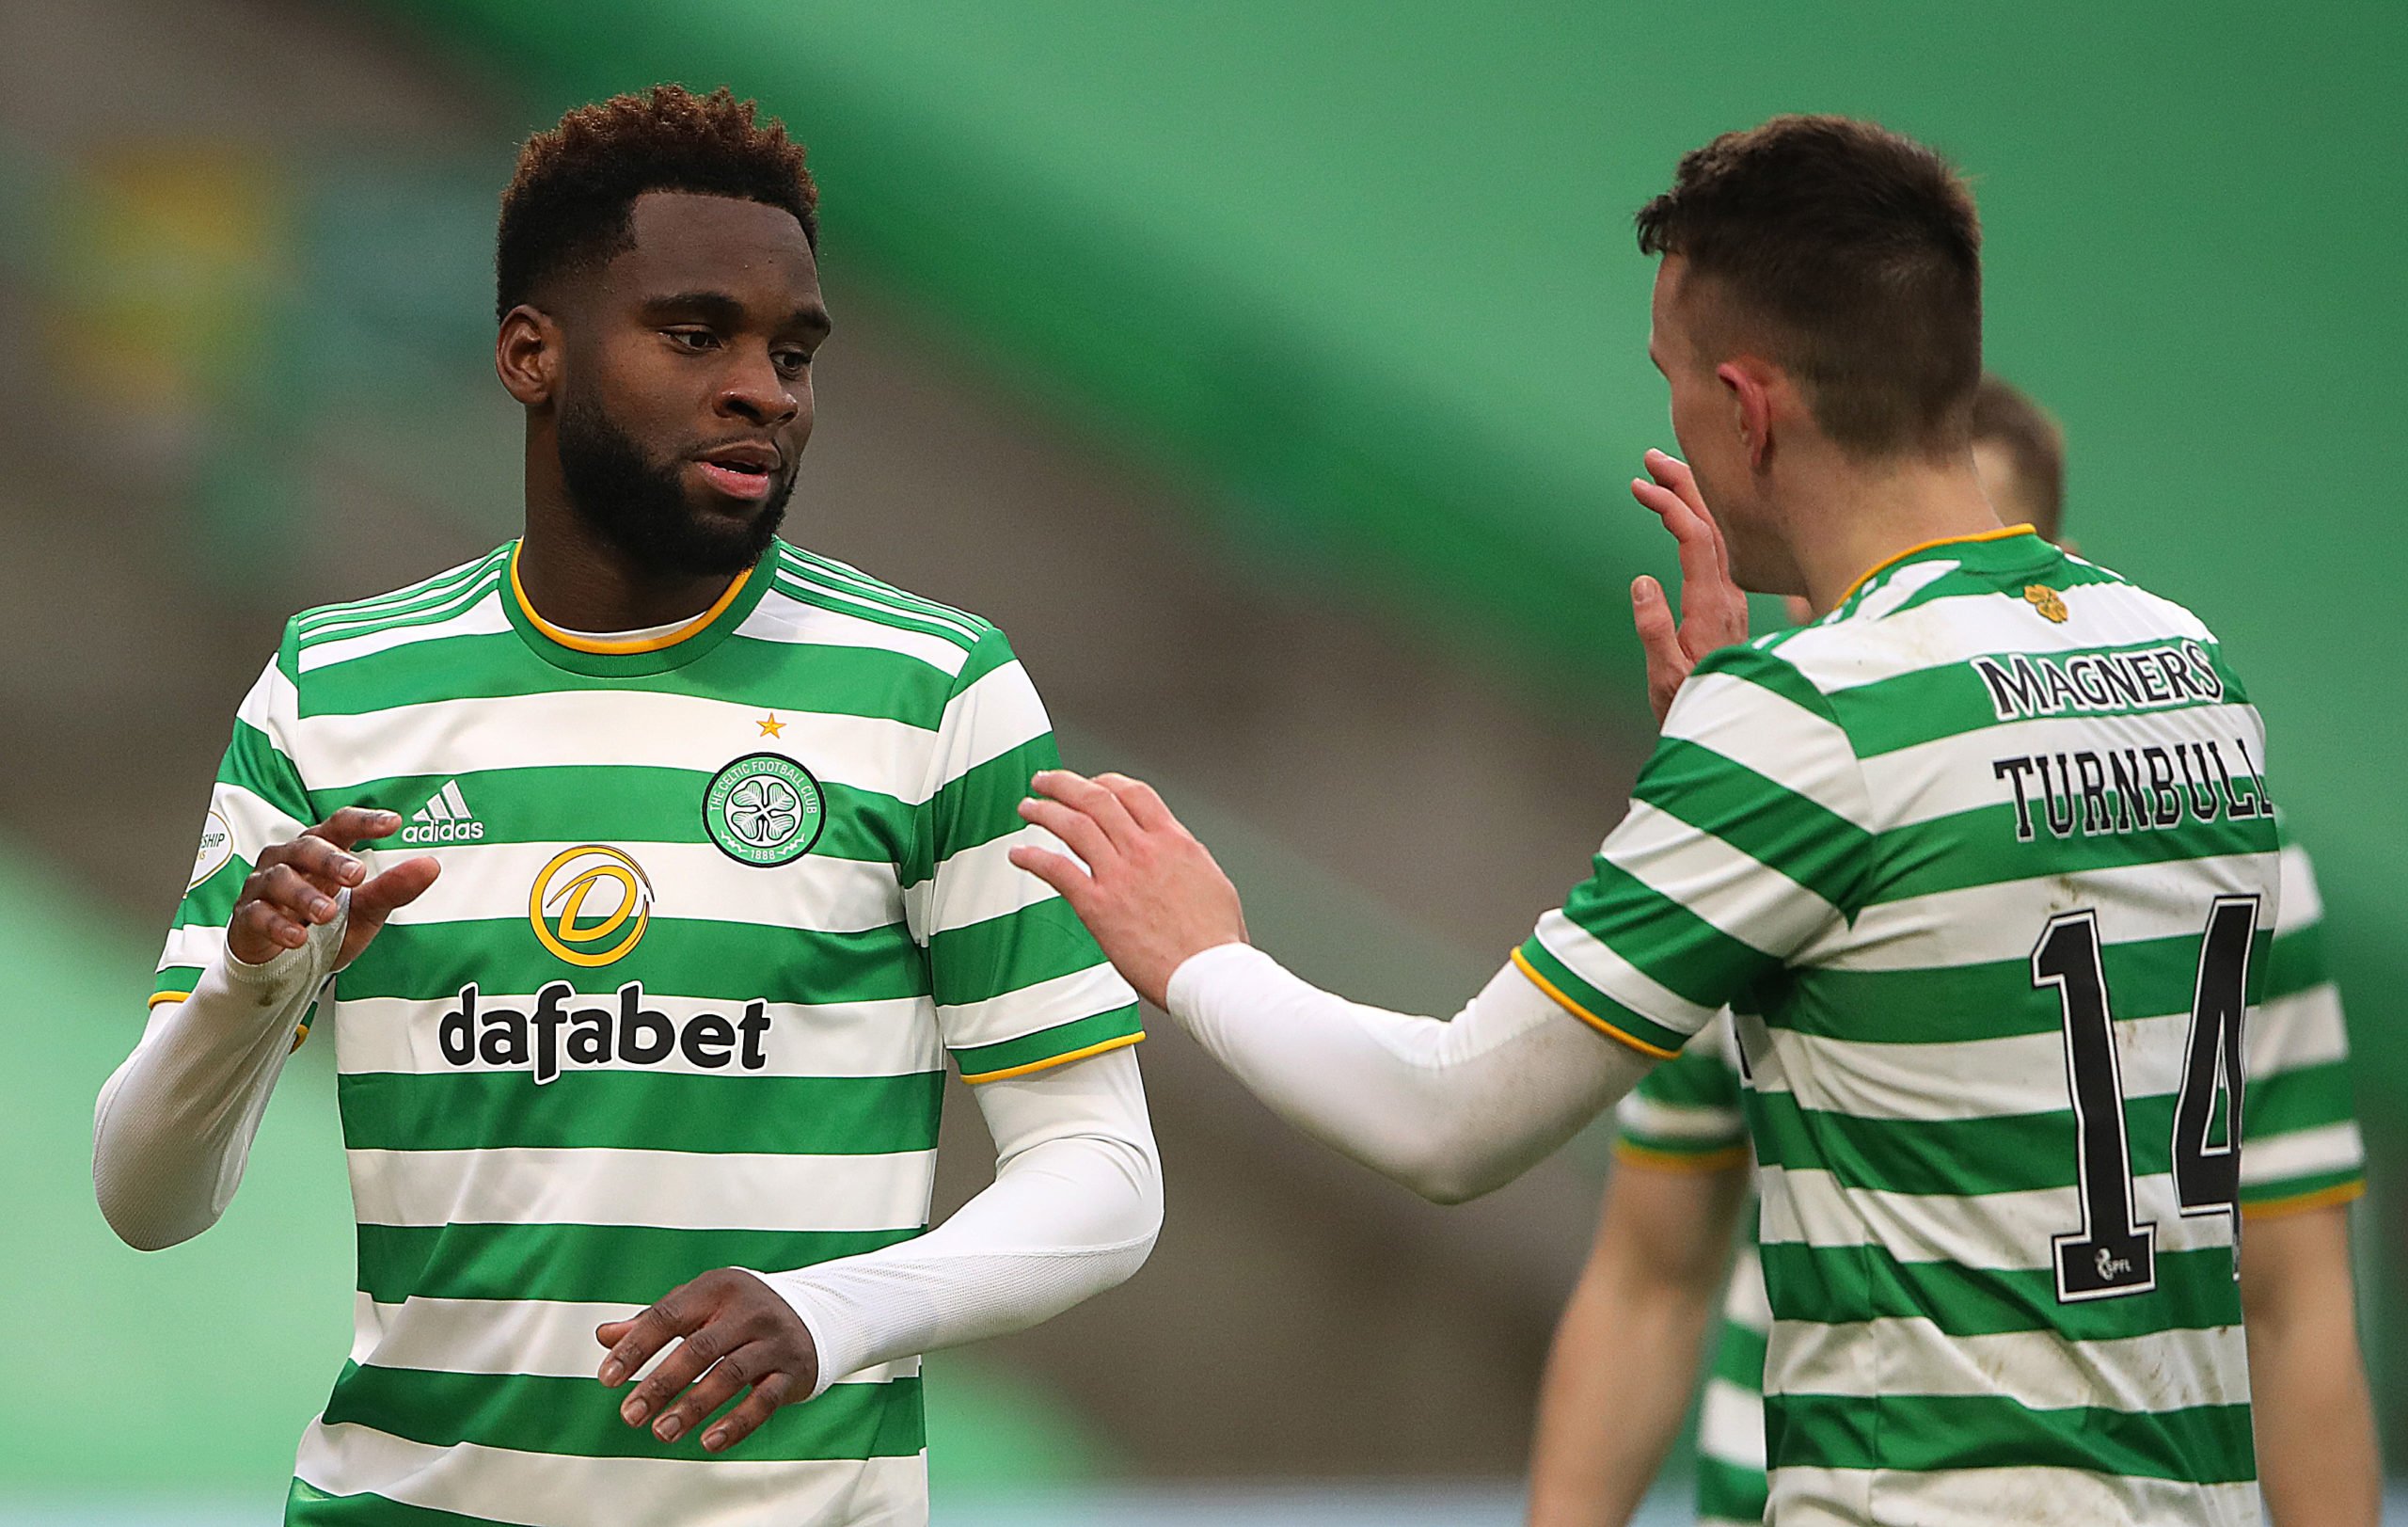 Hartson is right: Celtic star Odsonne Edouard is worth more than £18m